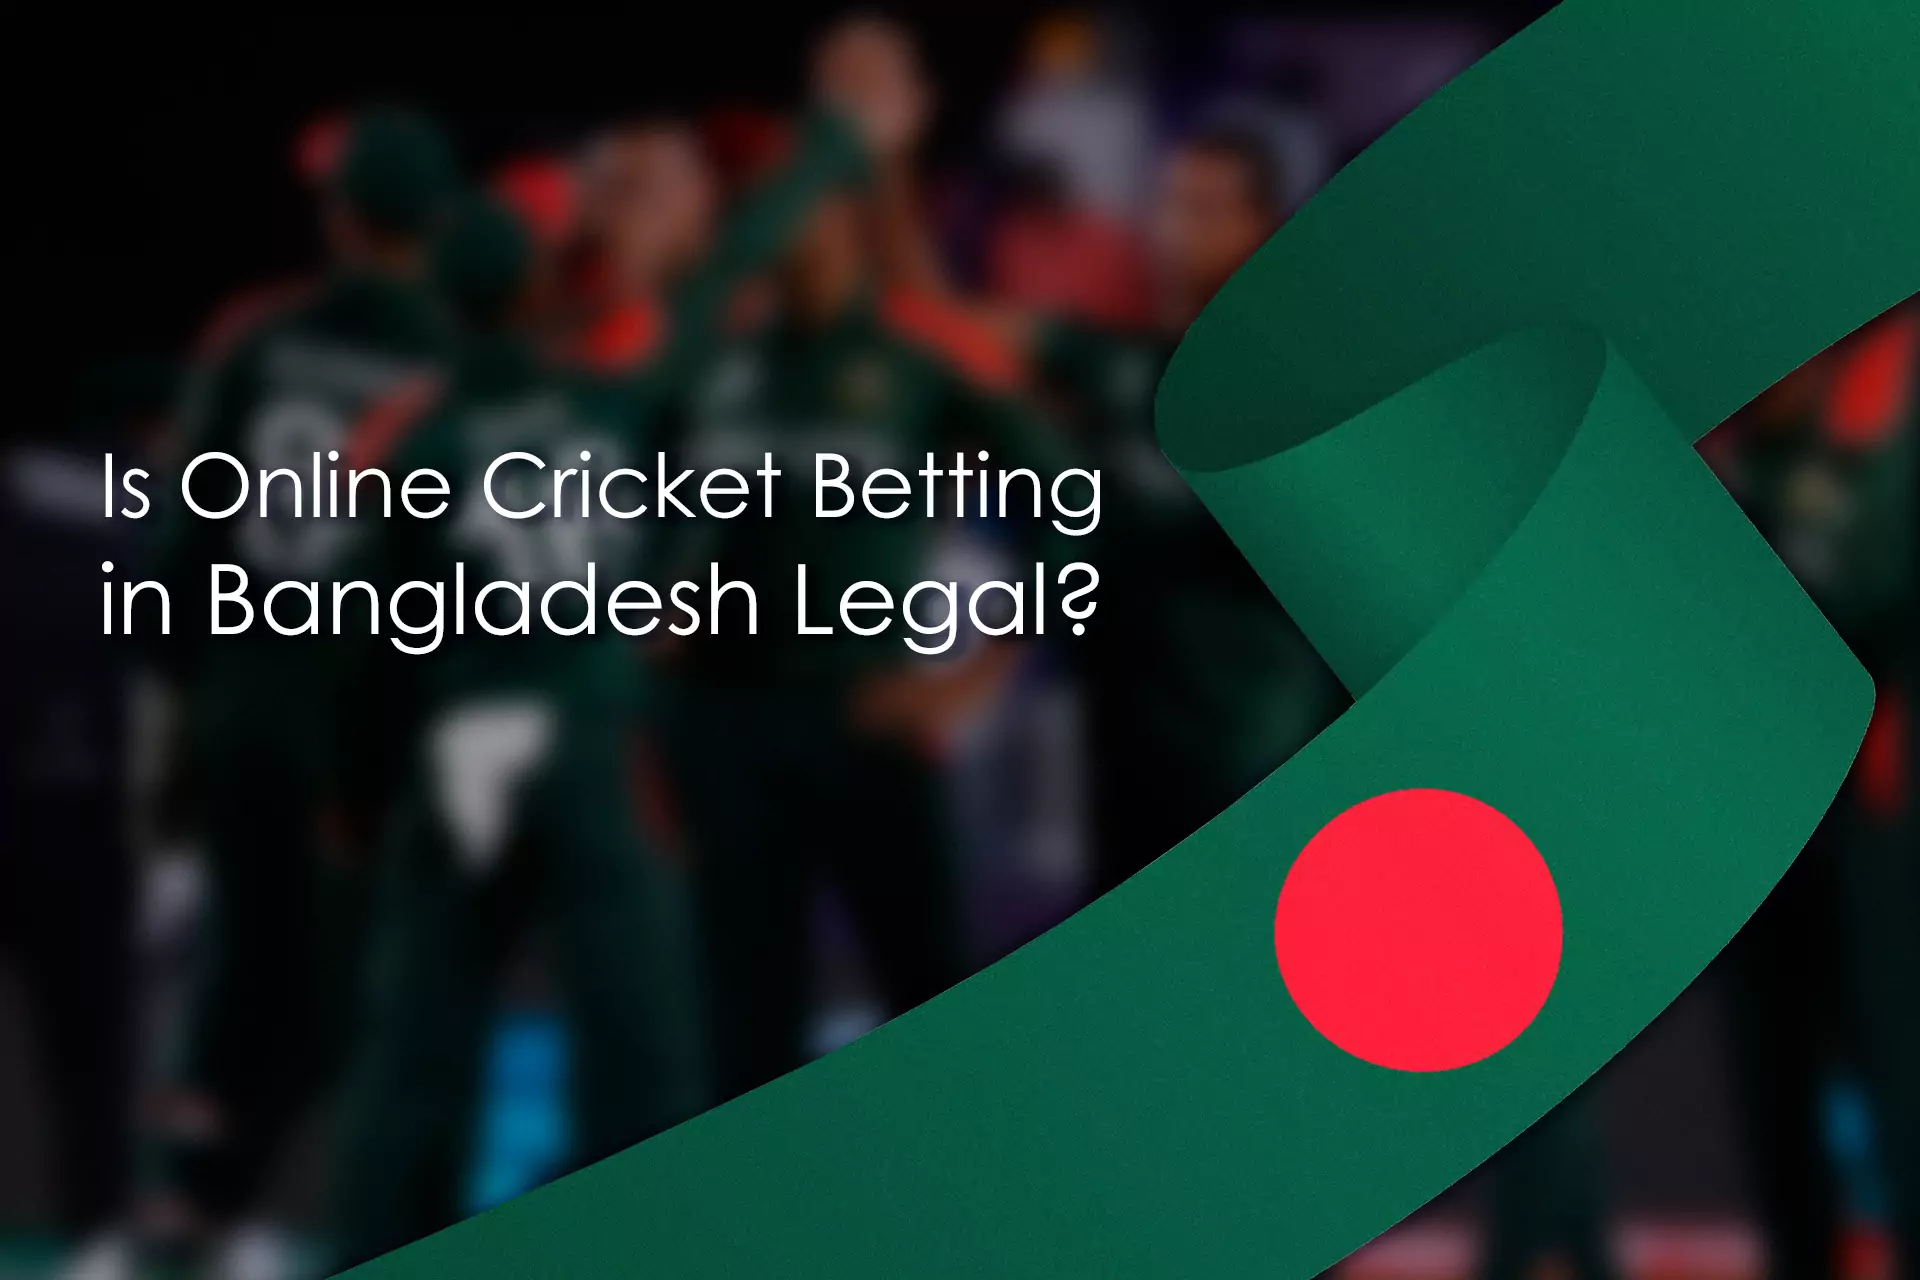 You can't place bets offline in Bangladesh but online bookmakers work legally.